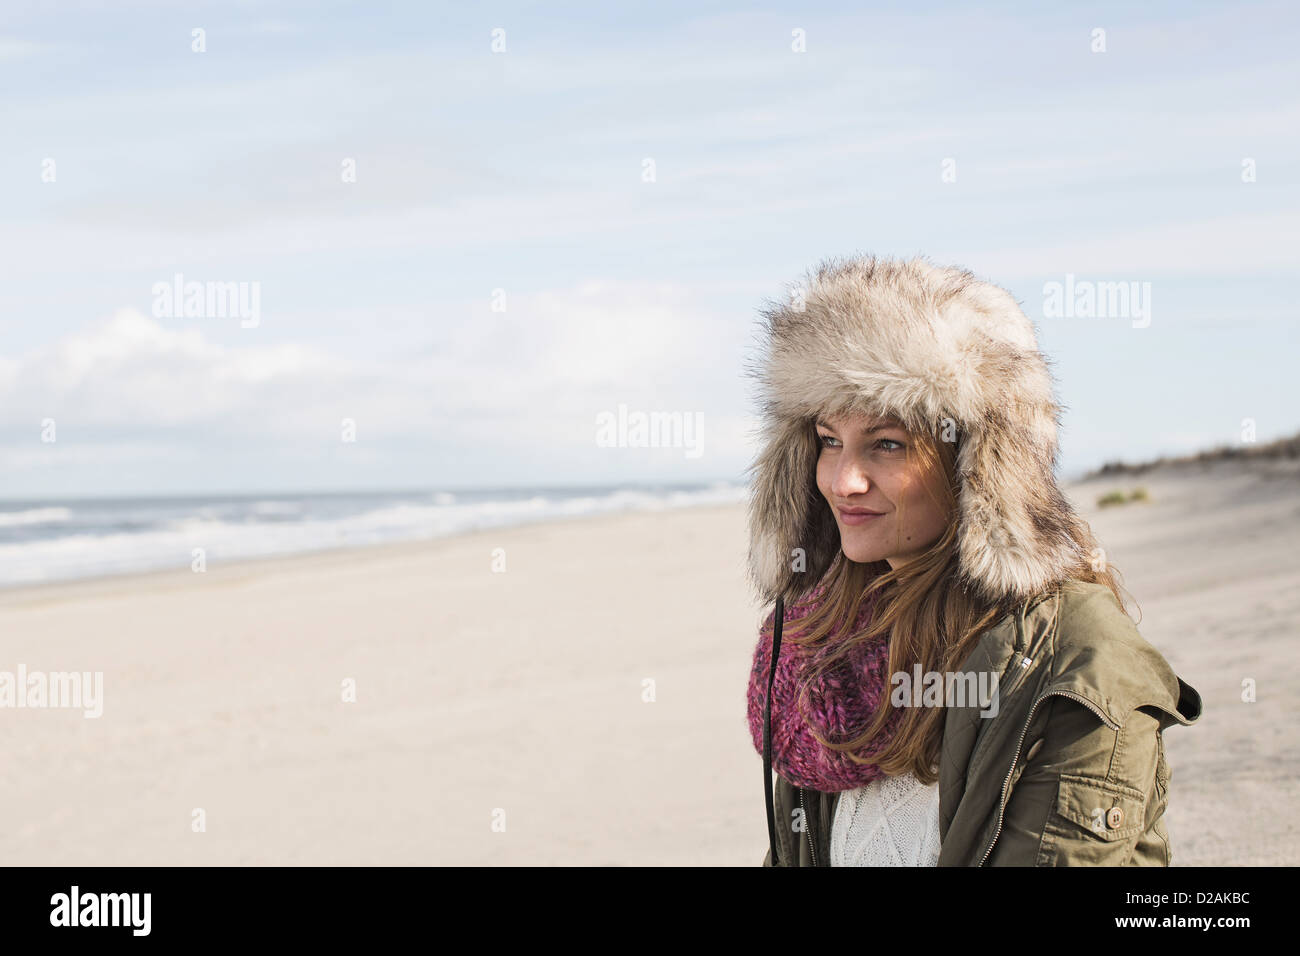 Smiling woman standing on beach Stock Photo